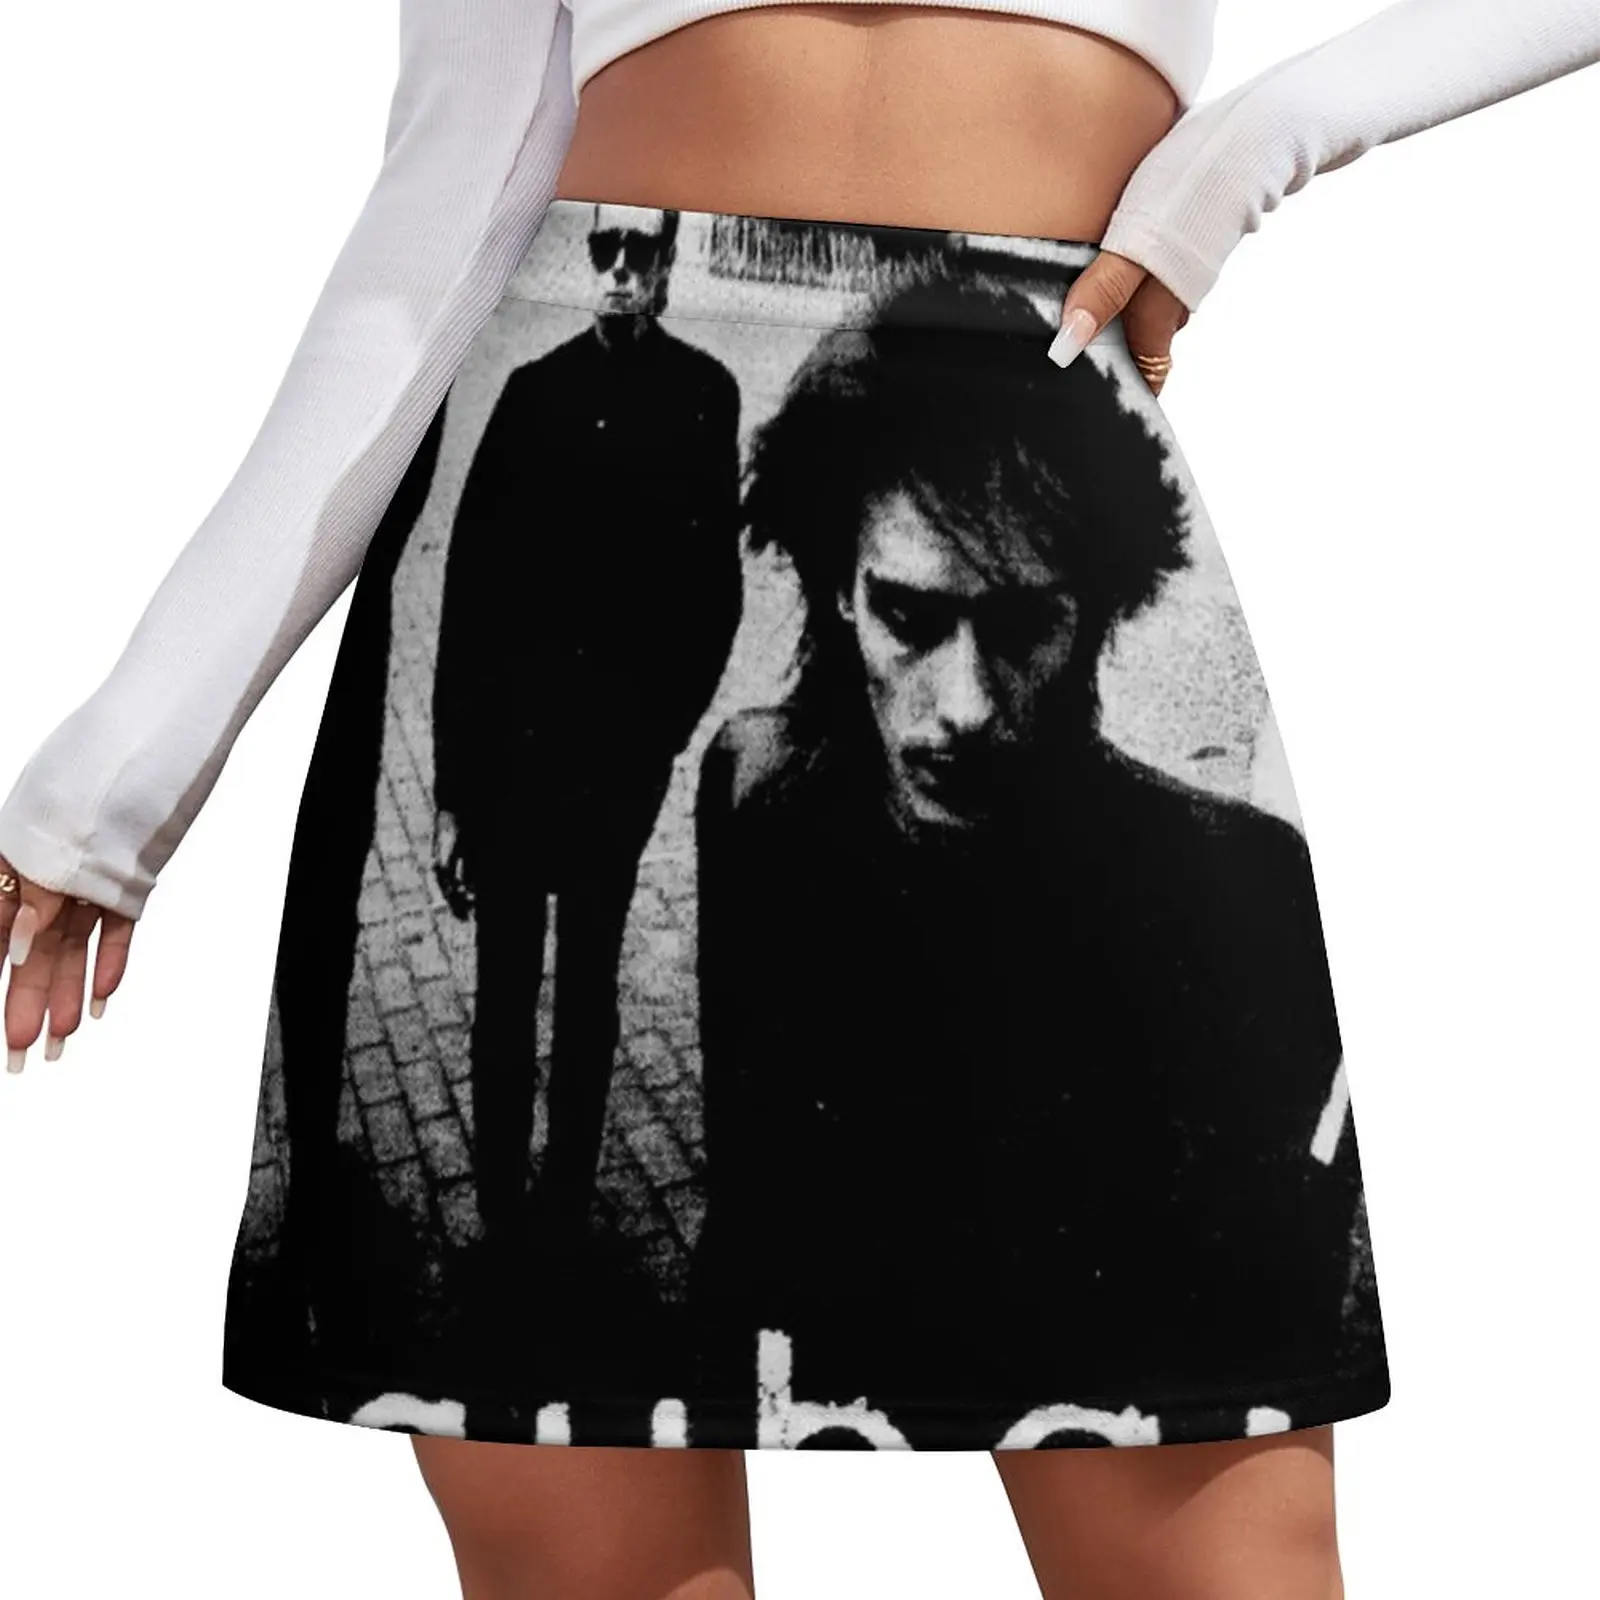 

This is Bauhaus Mini Skirt chic and elegant woman skirt night club outfit Summer women's clothing women clothes